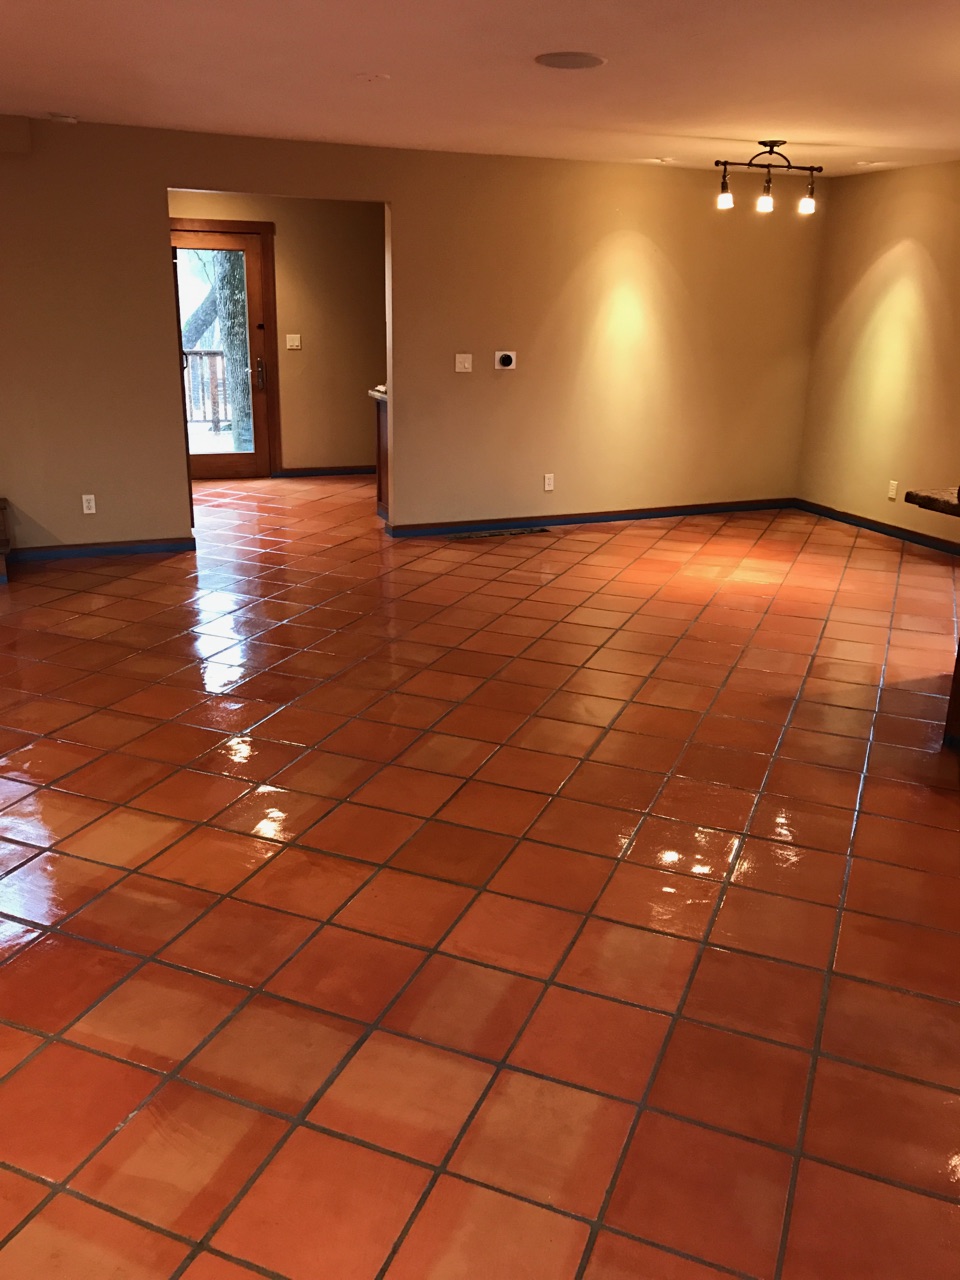 2 Common Terracotta Tile Restoration & Refinishing Misconceptions You Need To Know About and Why